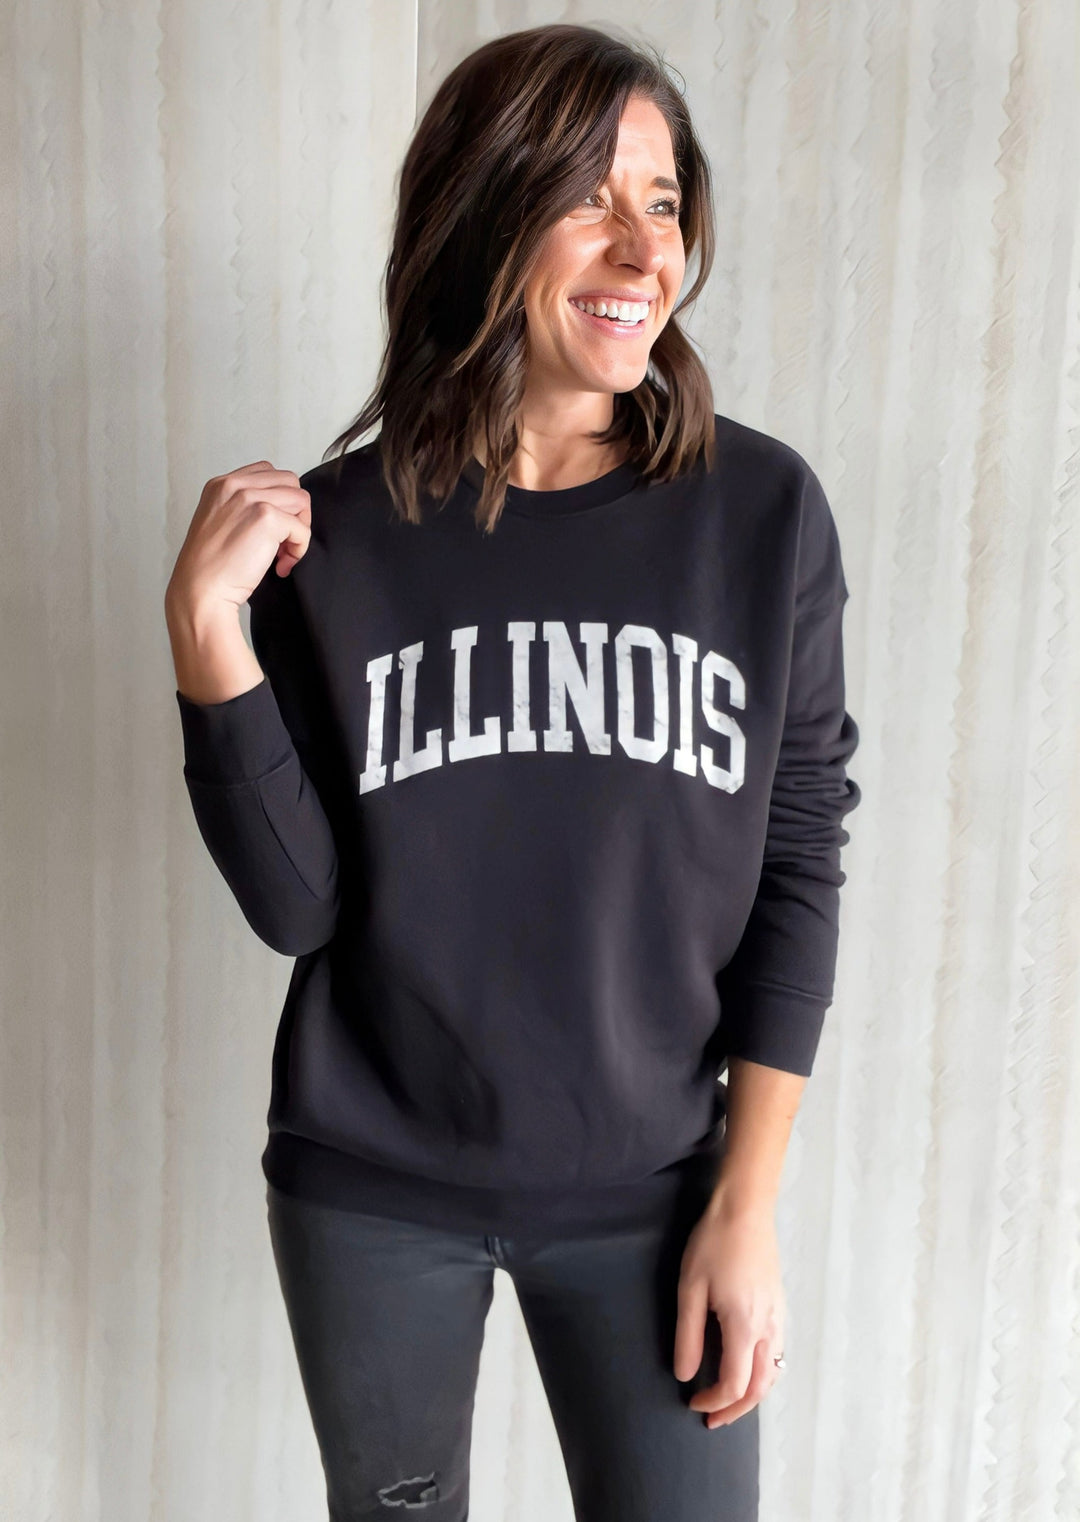 Women's Black Illinois Crewneck Sweatshirt with White distressted text from Champaign, Illinois Embolden Boutique.